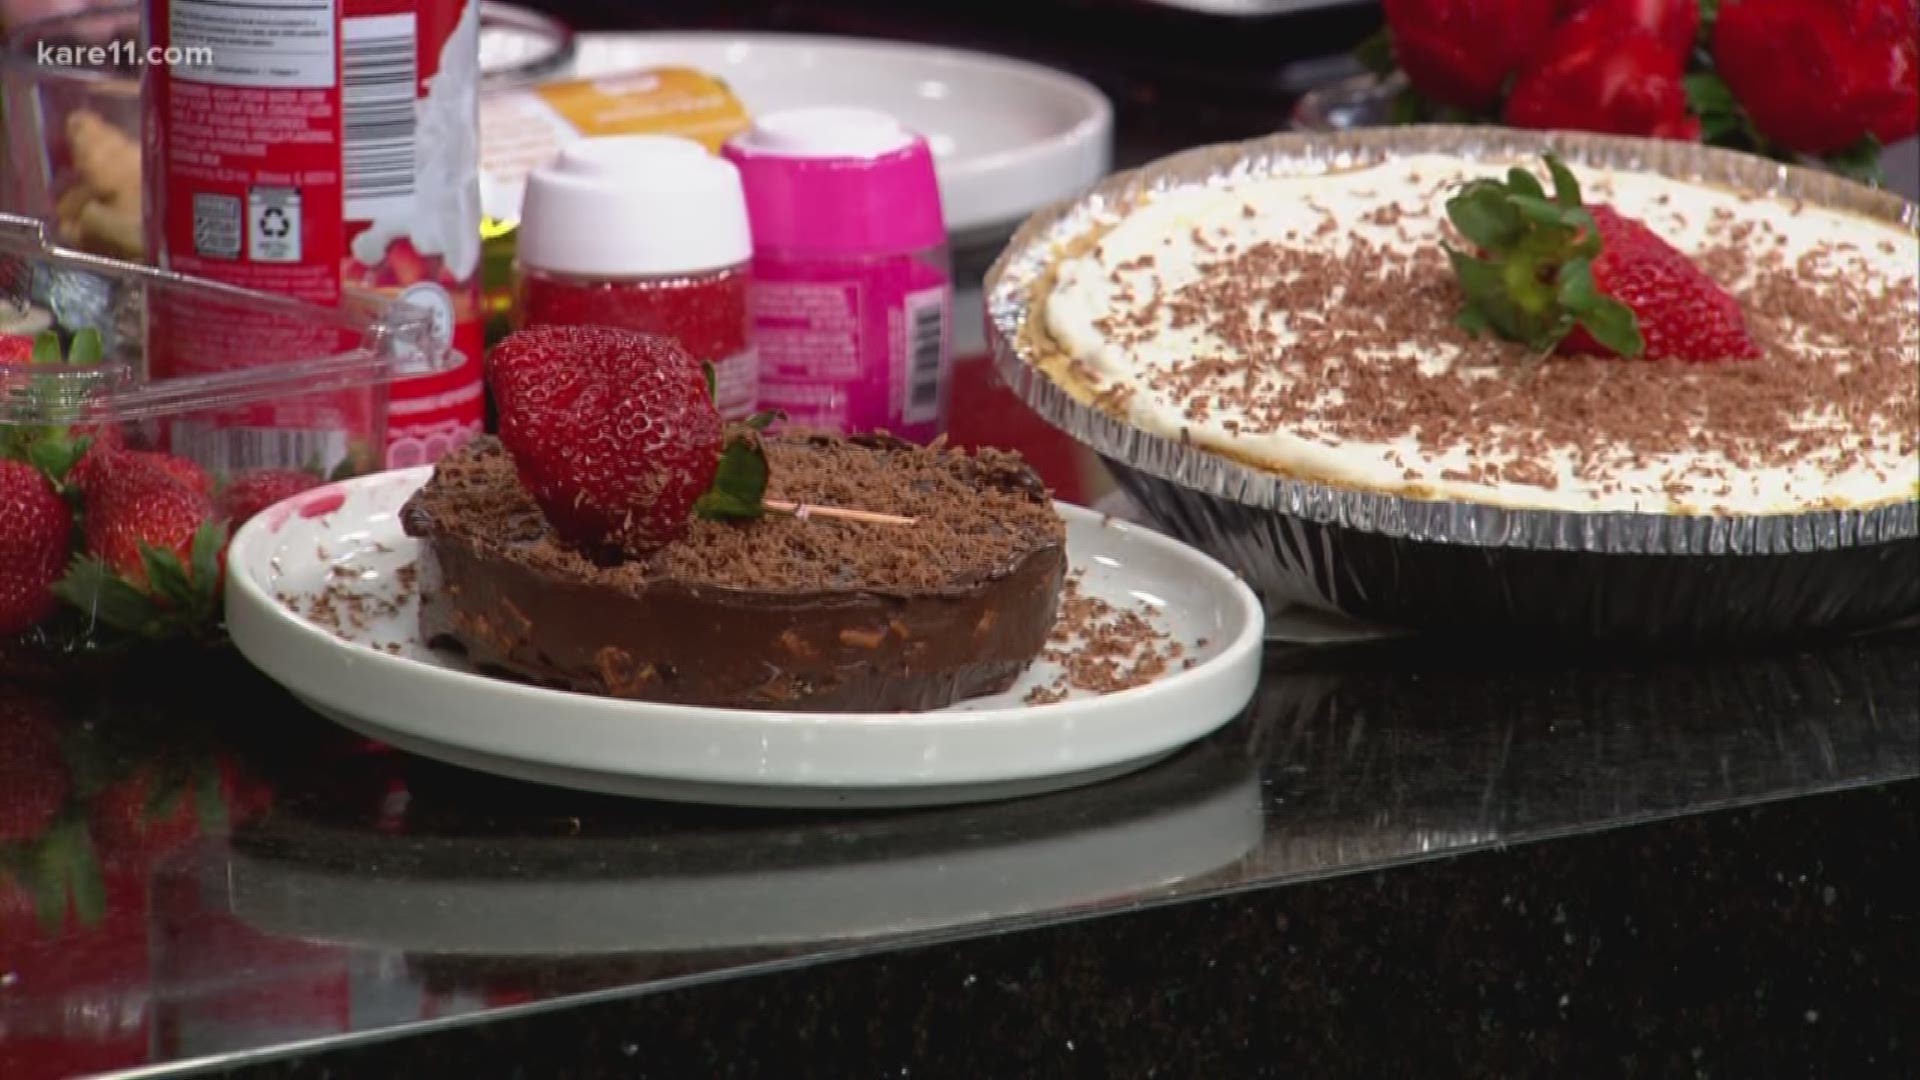 Sauce Anna Lisa creator and recipe innovator Chef Lisa O'Connell joined us with some easy-to-prepare and deliciously decadent no-bake Valentine's Day treats. https://kare11.tv/2RVhdJP